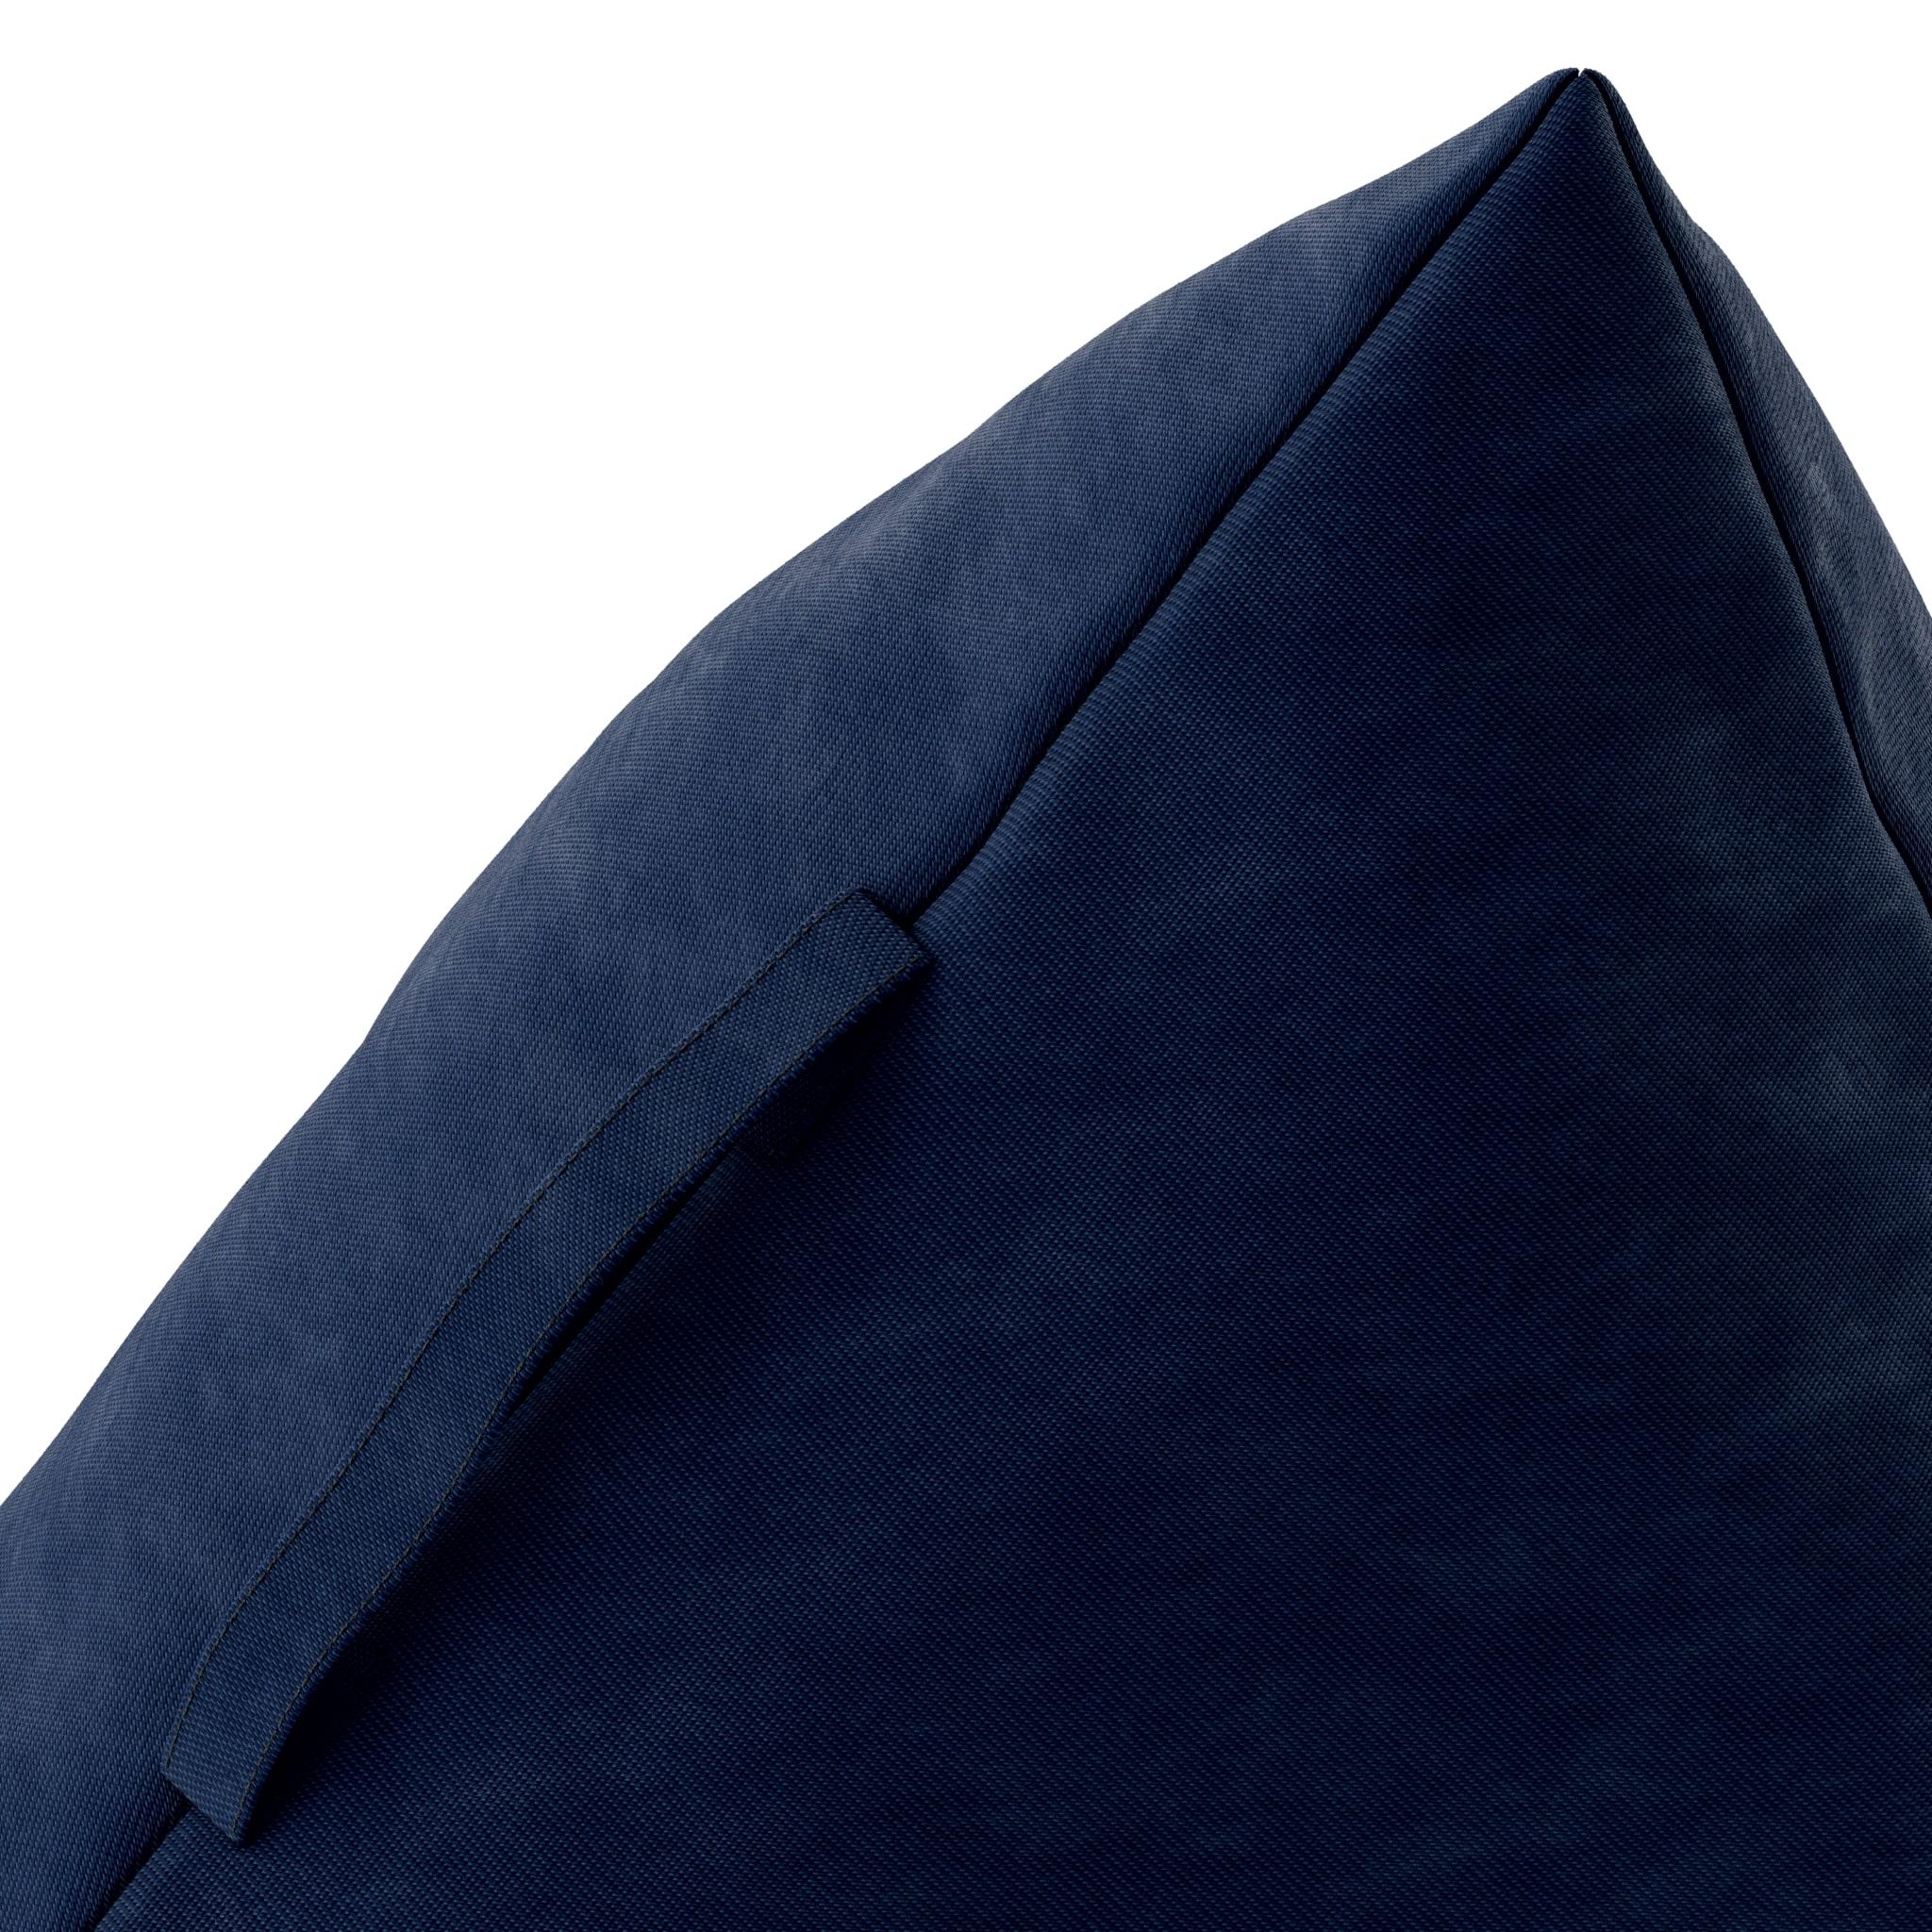 Blue Triangle is a shaped pillow that will make your home unique. These triangular cushions are perfect for adding a wow effect to your room decoration. It is also comfortable and elegant. It can be used in the kids room or even in the living room